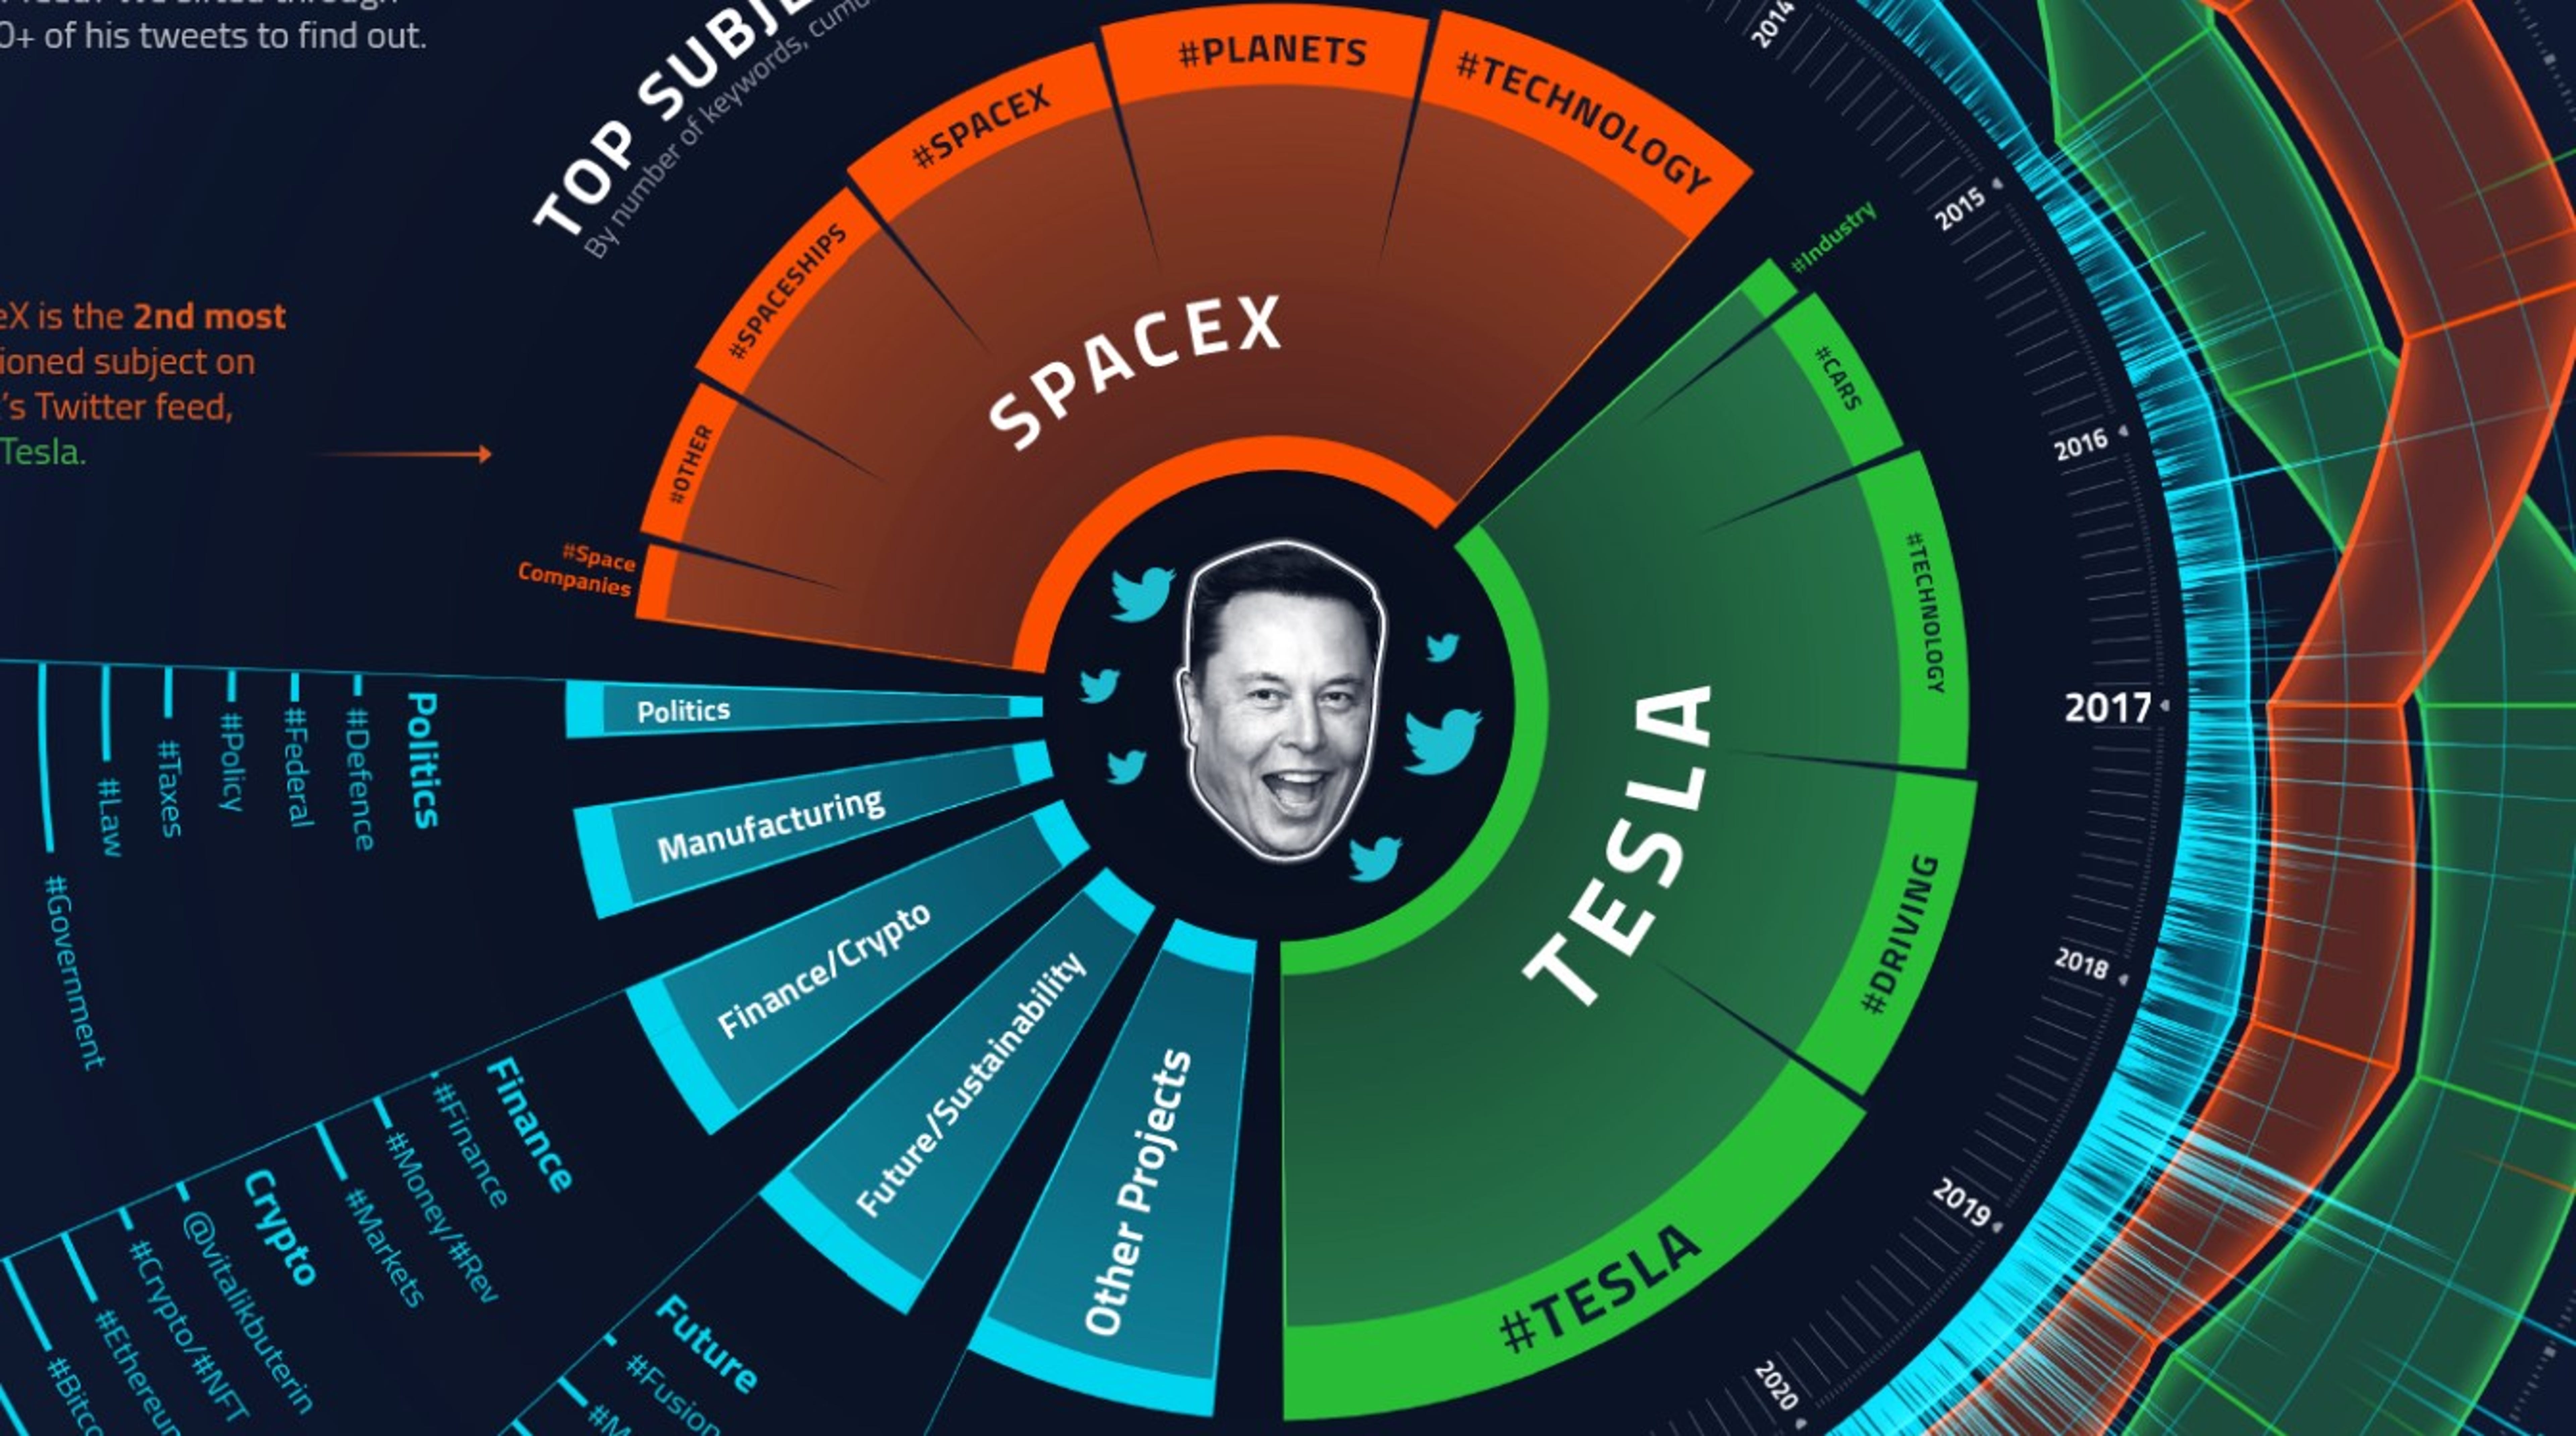 The 7 Most Tweeted Topics By Elon Musk: How Do Tesla, SpaceX, Bitcoin And Dogecoin Rank?